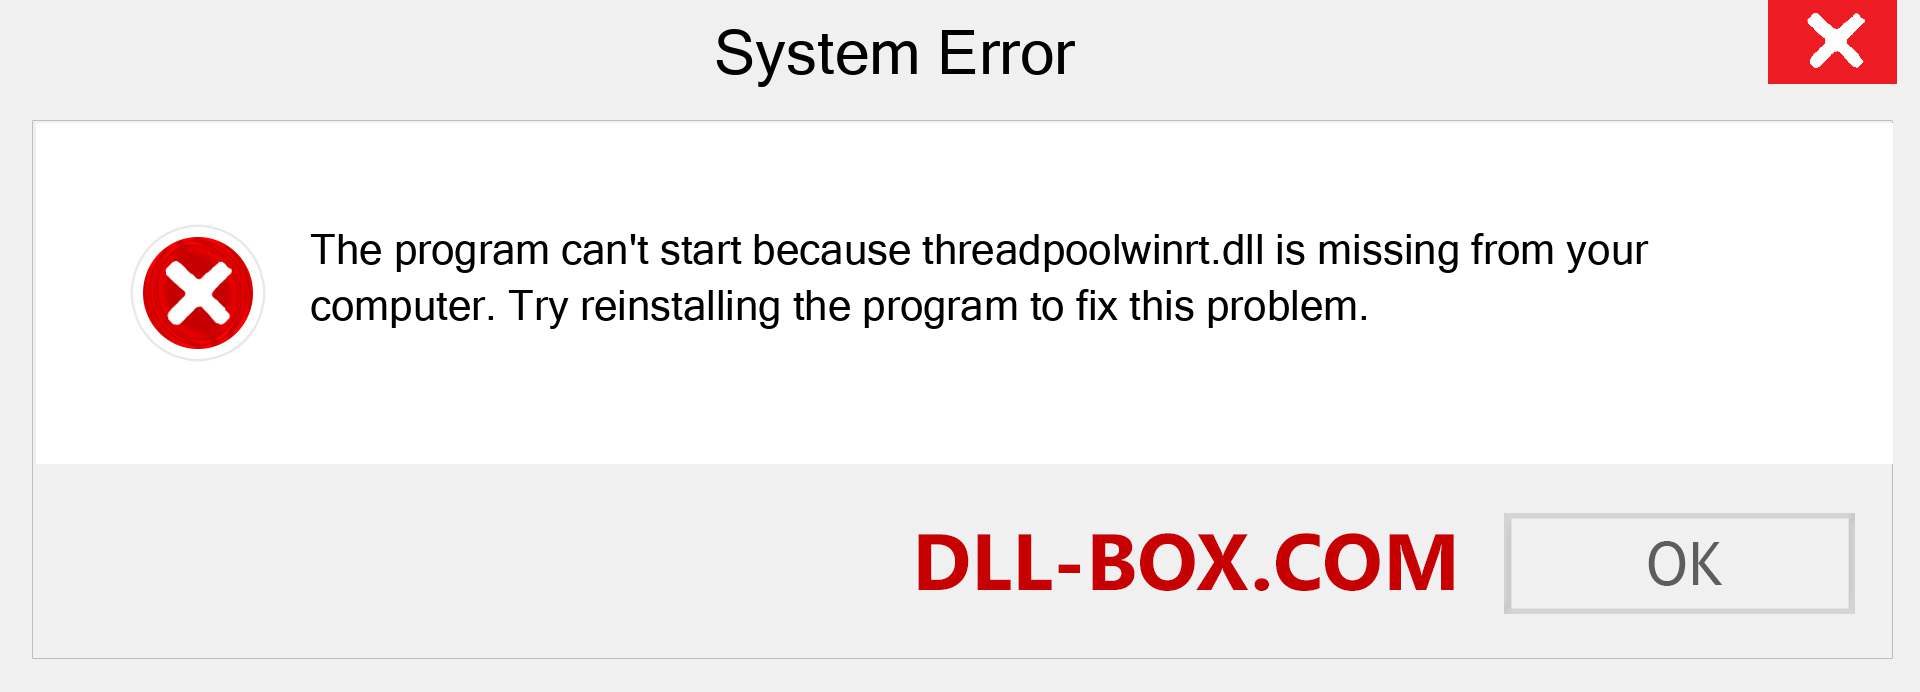  threadpoolwinrt.dll file is missing?. Download for Windows 7, 8, 10 - Fix  threadpoolwinrt dll Missing Error on Windows, photos, images